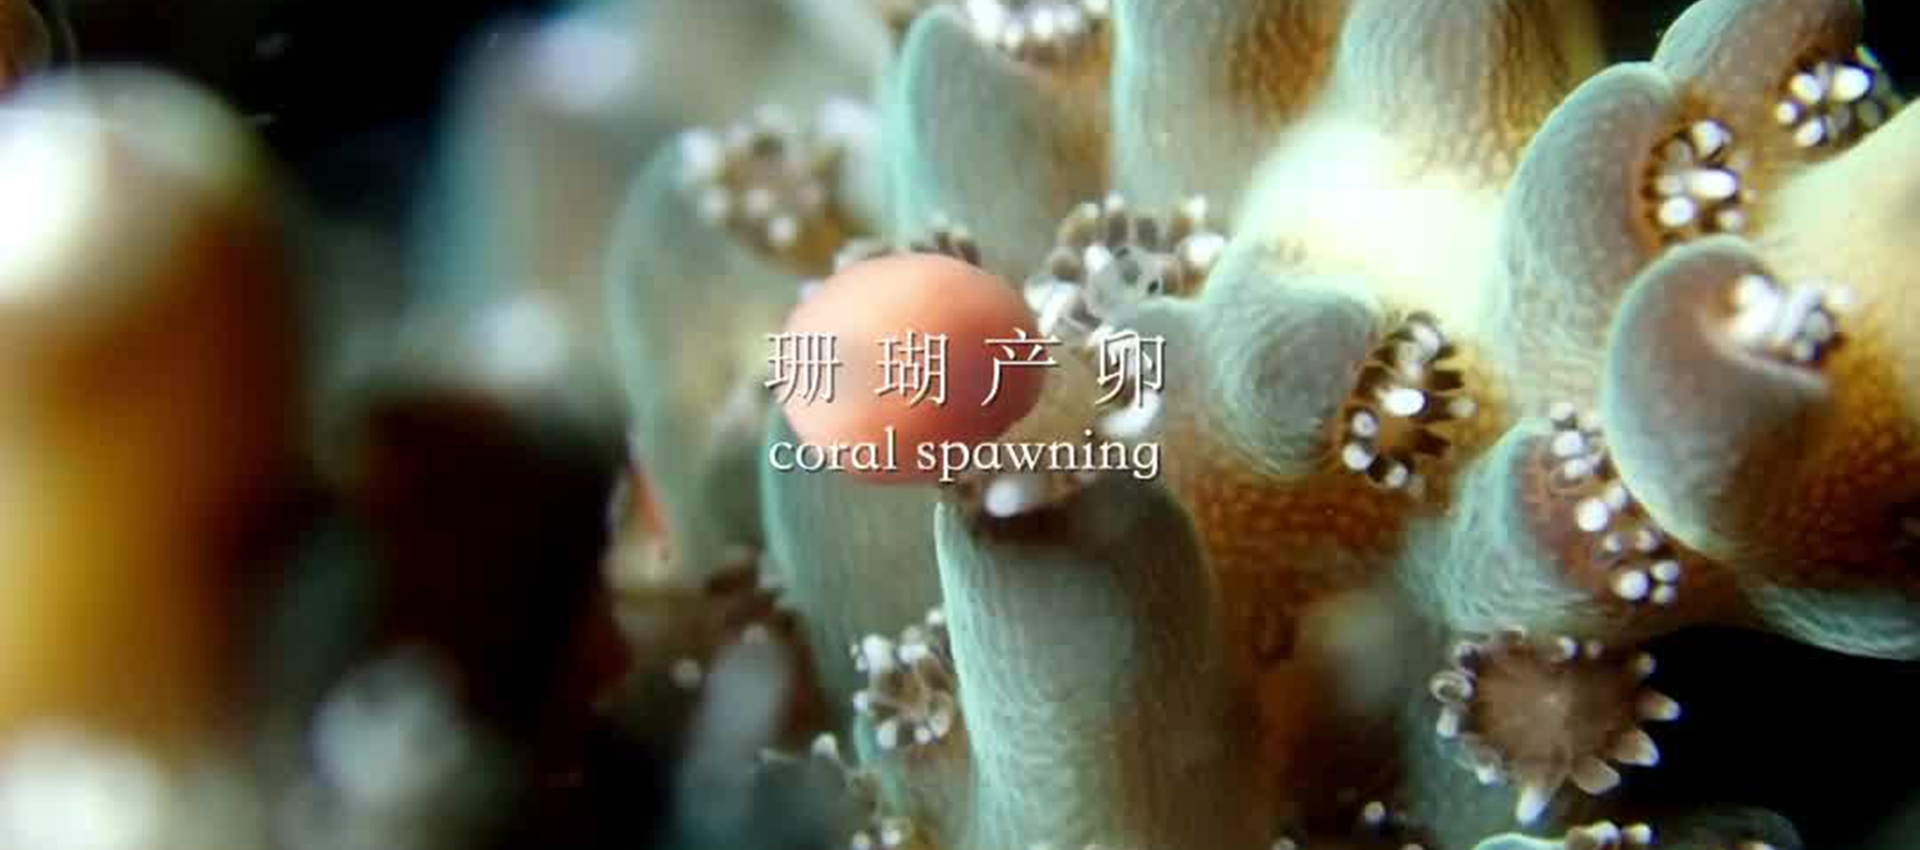 The annual coral spawning event is right around the corner